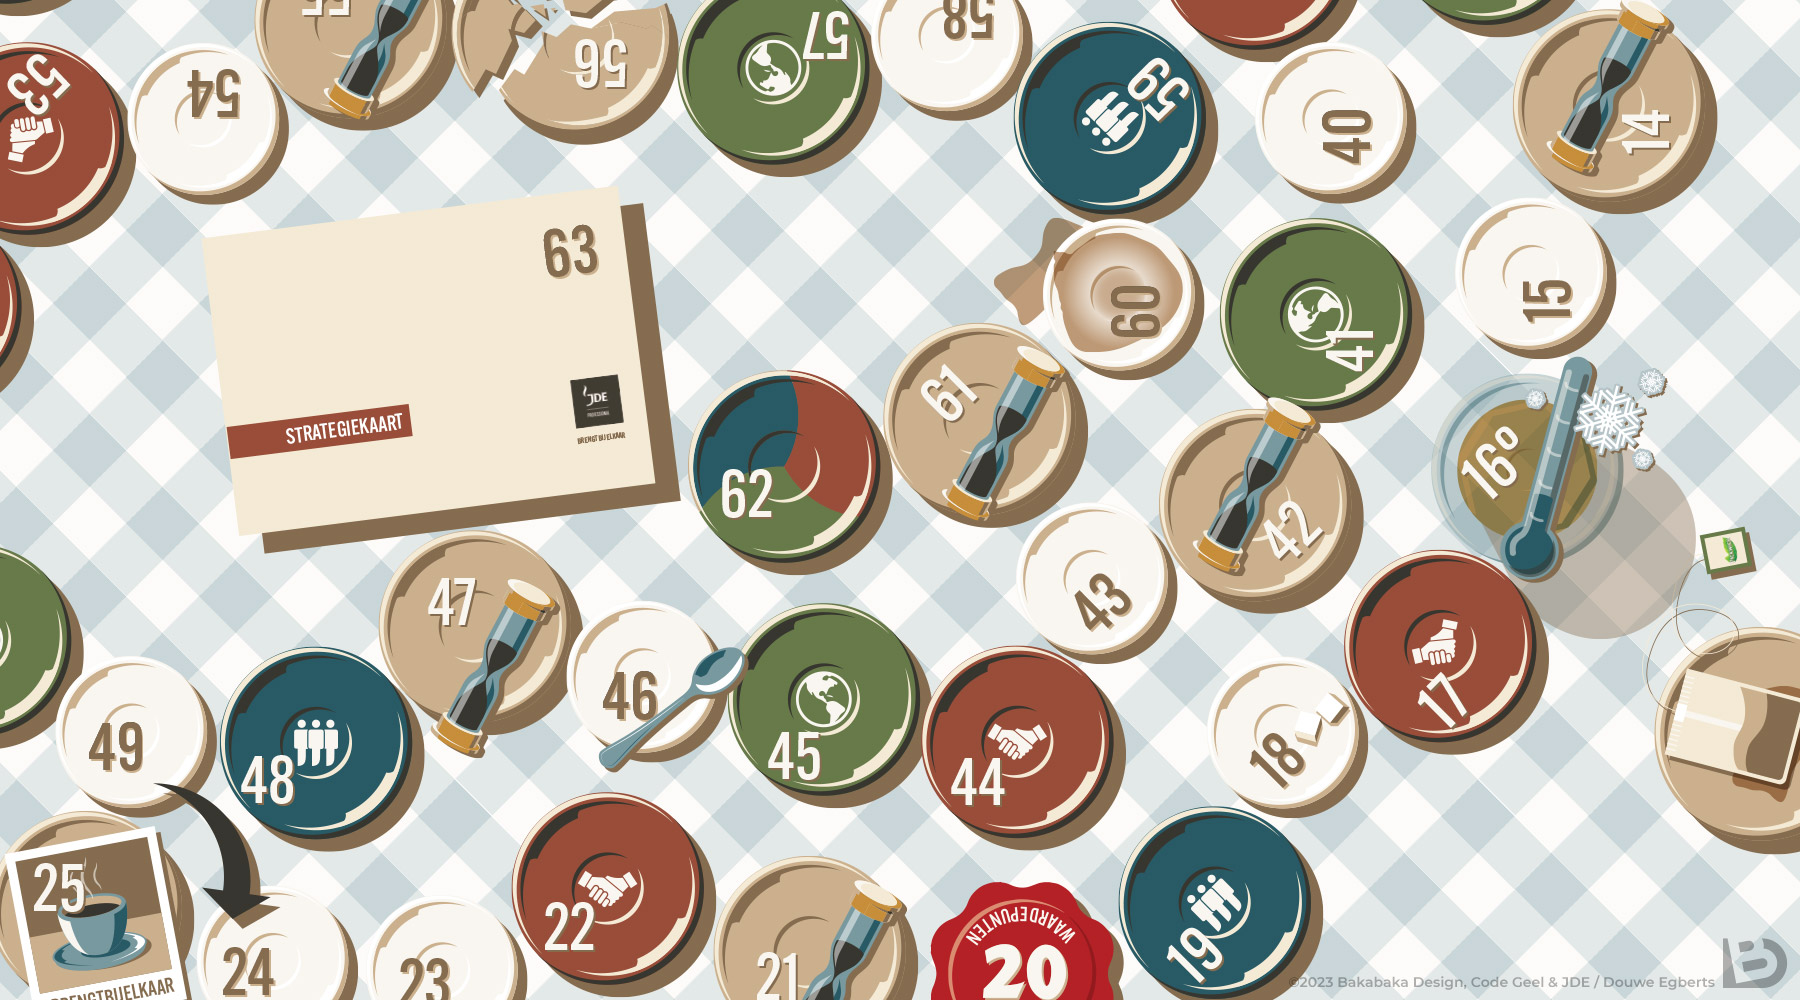 A detail of the game board of a board game for internal communication for coffee company Douwe Egberts